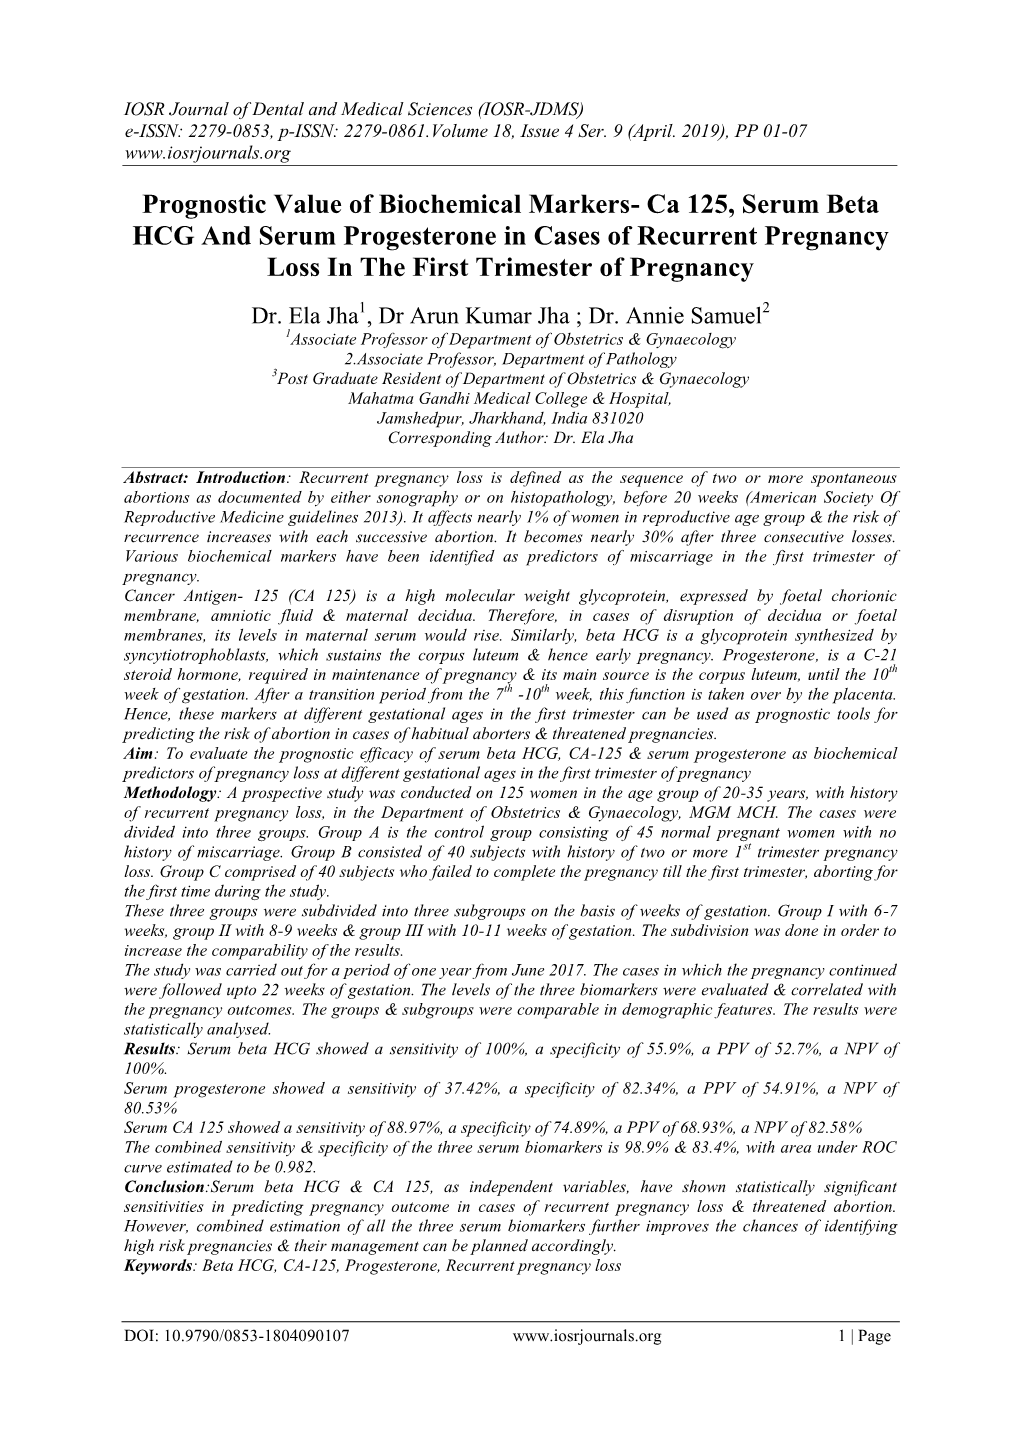 Ca 125, Serum Beta HCG and Serum Progesterone in Cases of Recurrent Pregnancy Loss in the First Trimester of Pregnancy